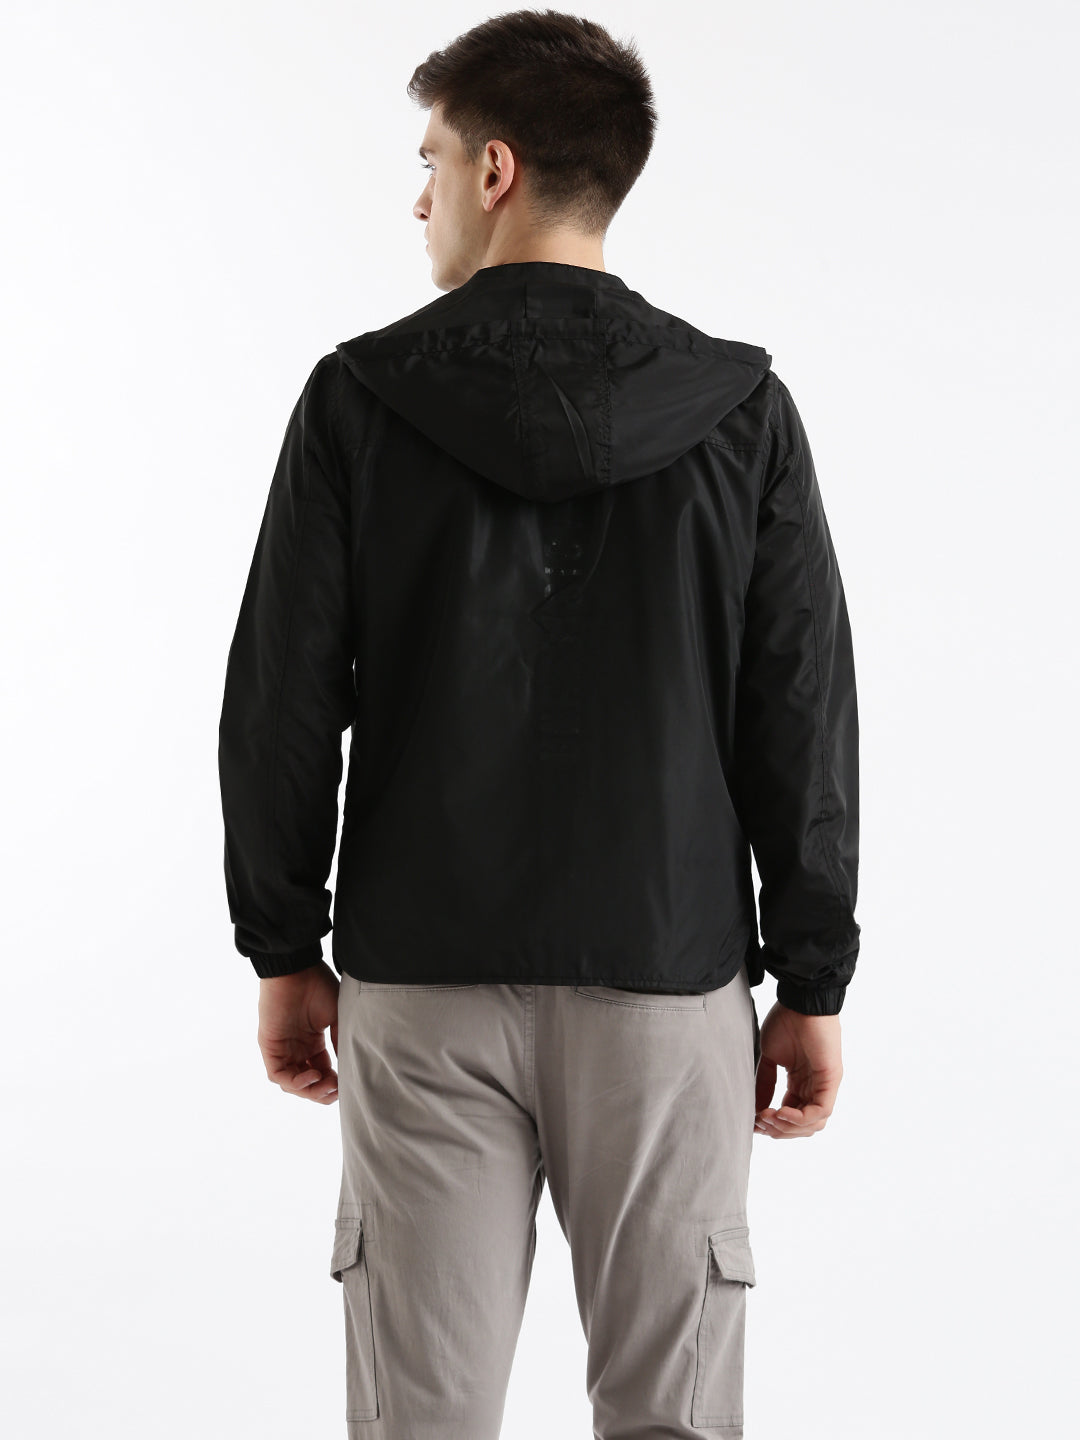 Hooded Abstract Black Jacket